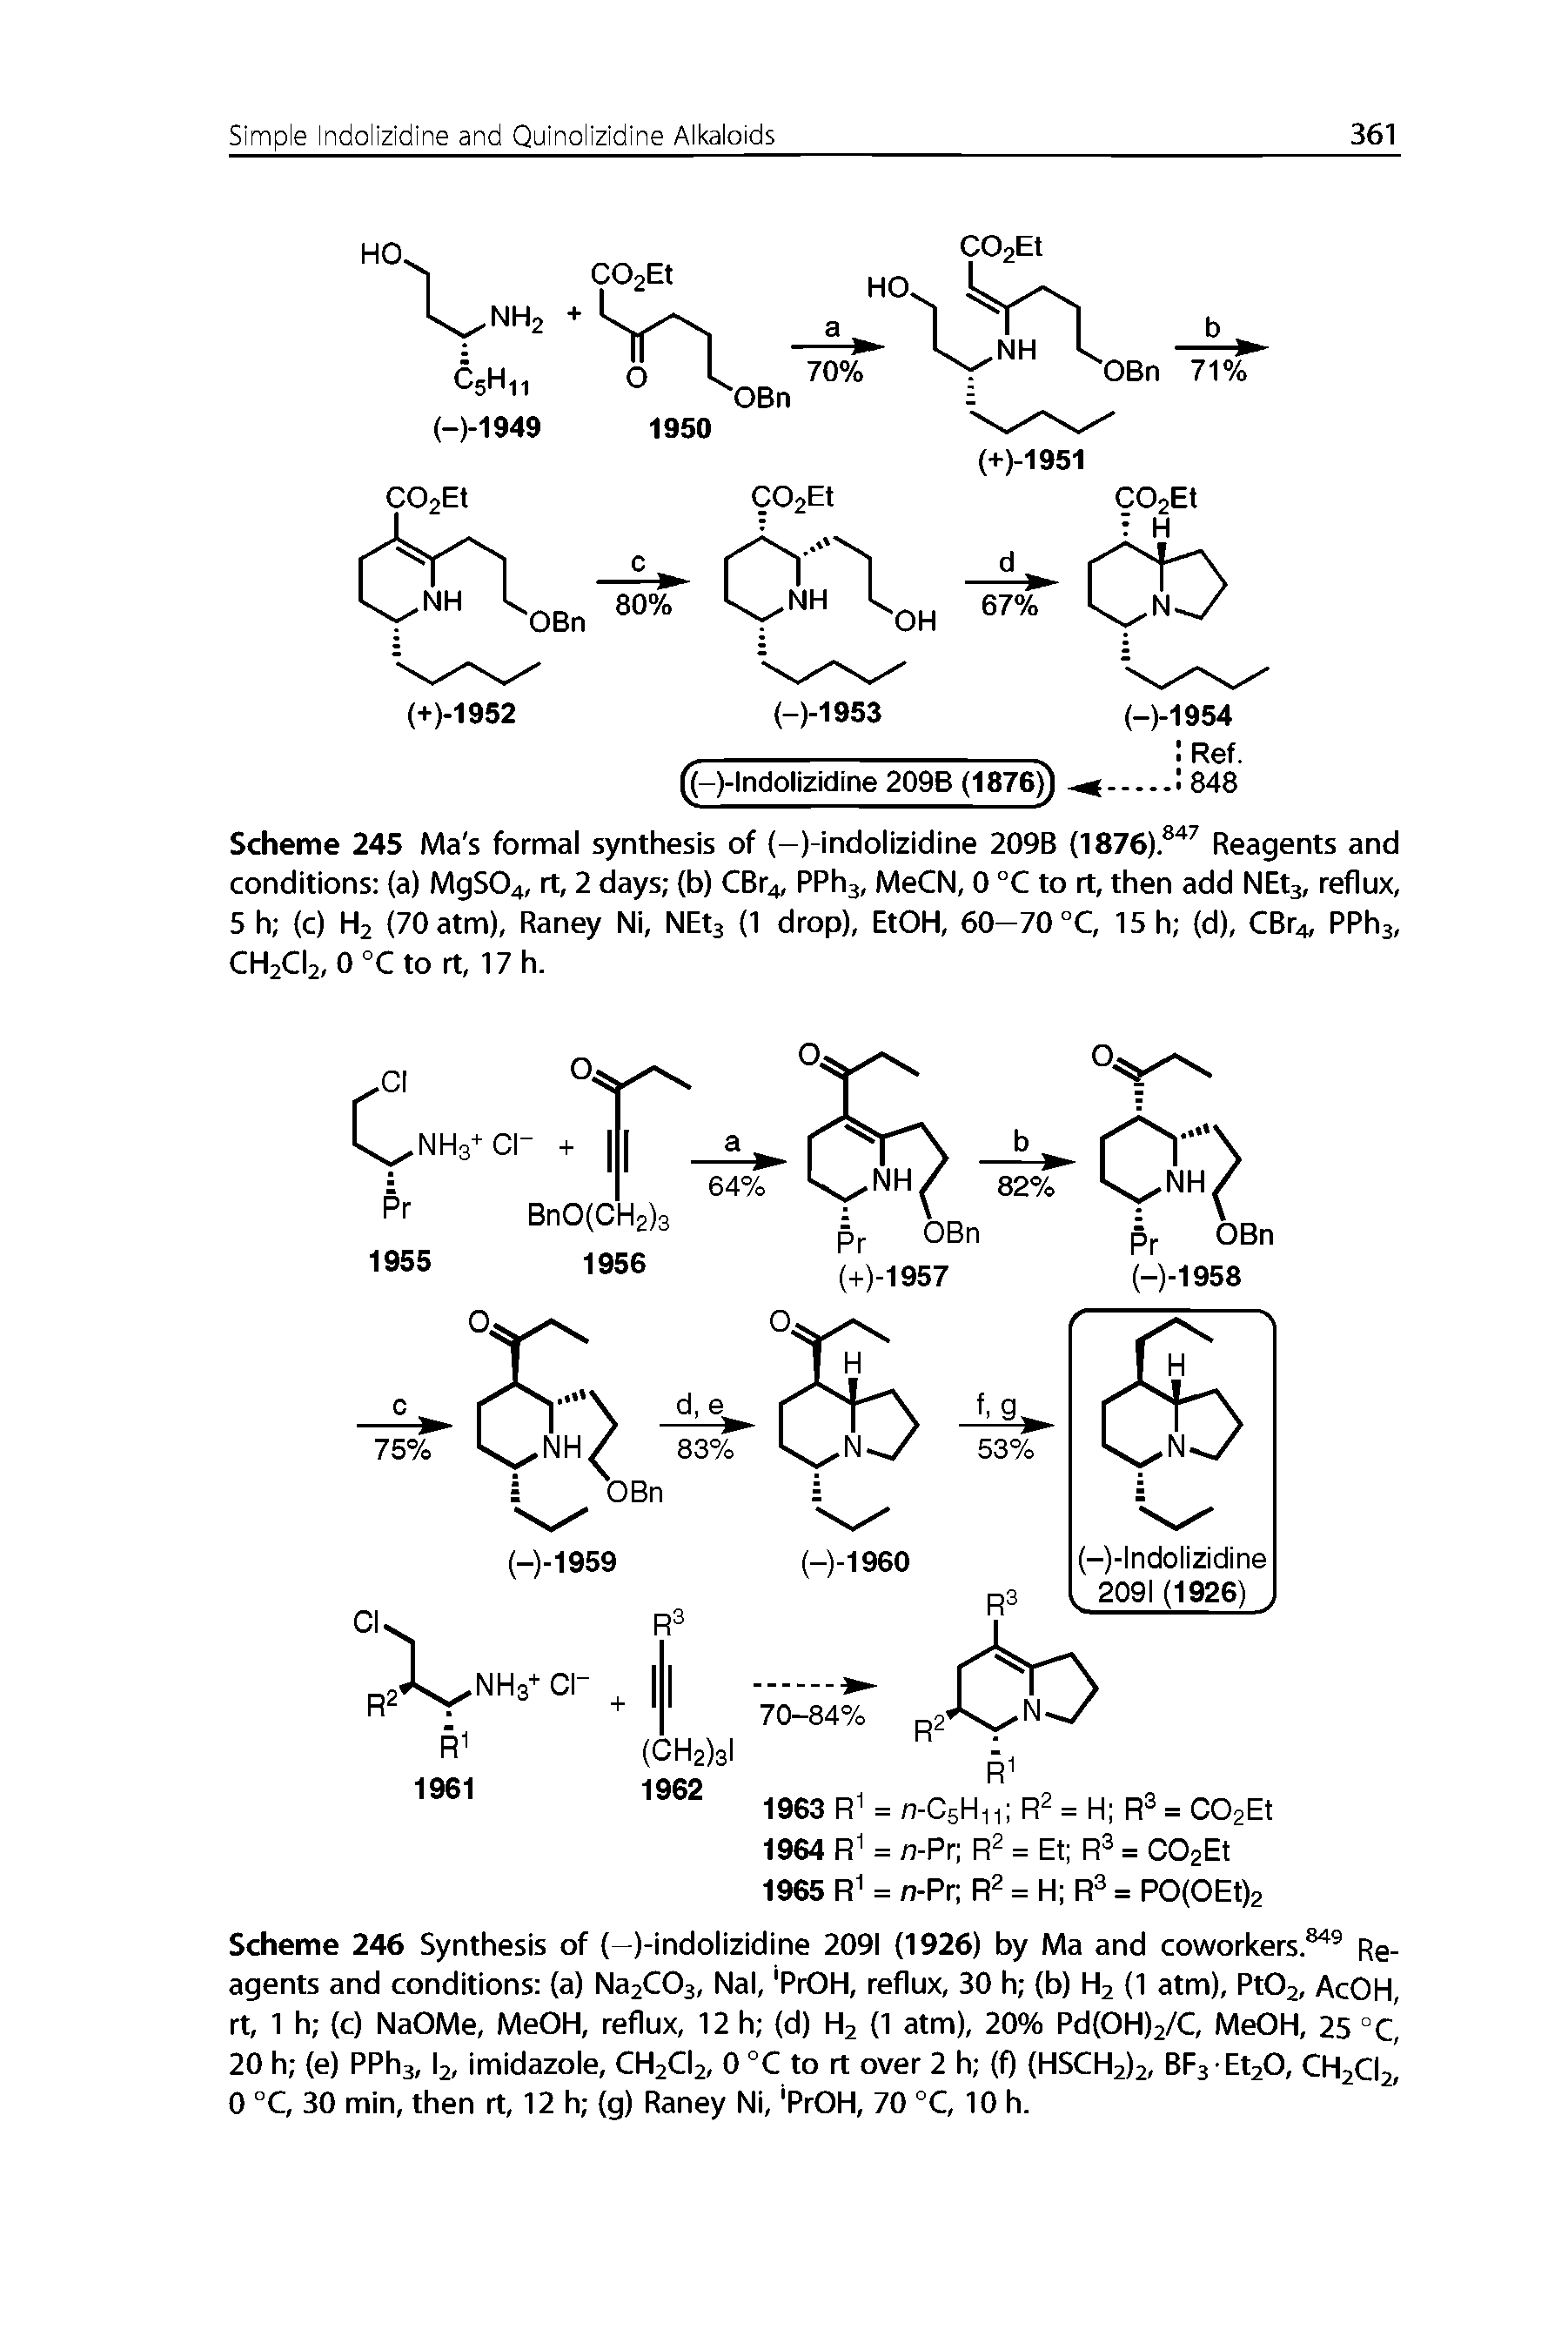 Scheme 245 Ma s formal synthesis of (—)-indolizidine 209B (1876). Reagents and conditions (a) MgS04, it, 2 days (b) CBr4, PPhj, MeCN, 0 °C to it, then add NEts, reflux, 5 h (c) Hi (70 atm), Raney Ni, NEtj (1 drop), EtOH, 60-70 C, 15 h (d), CBr4, PPhs, CH2CI2, 0 °C to It, 17 h.